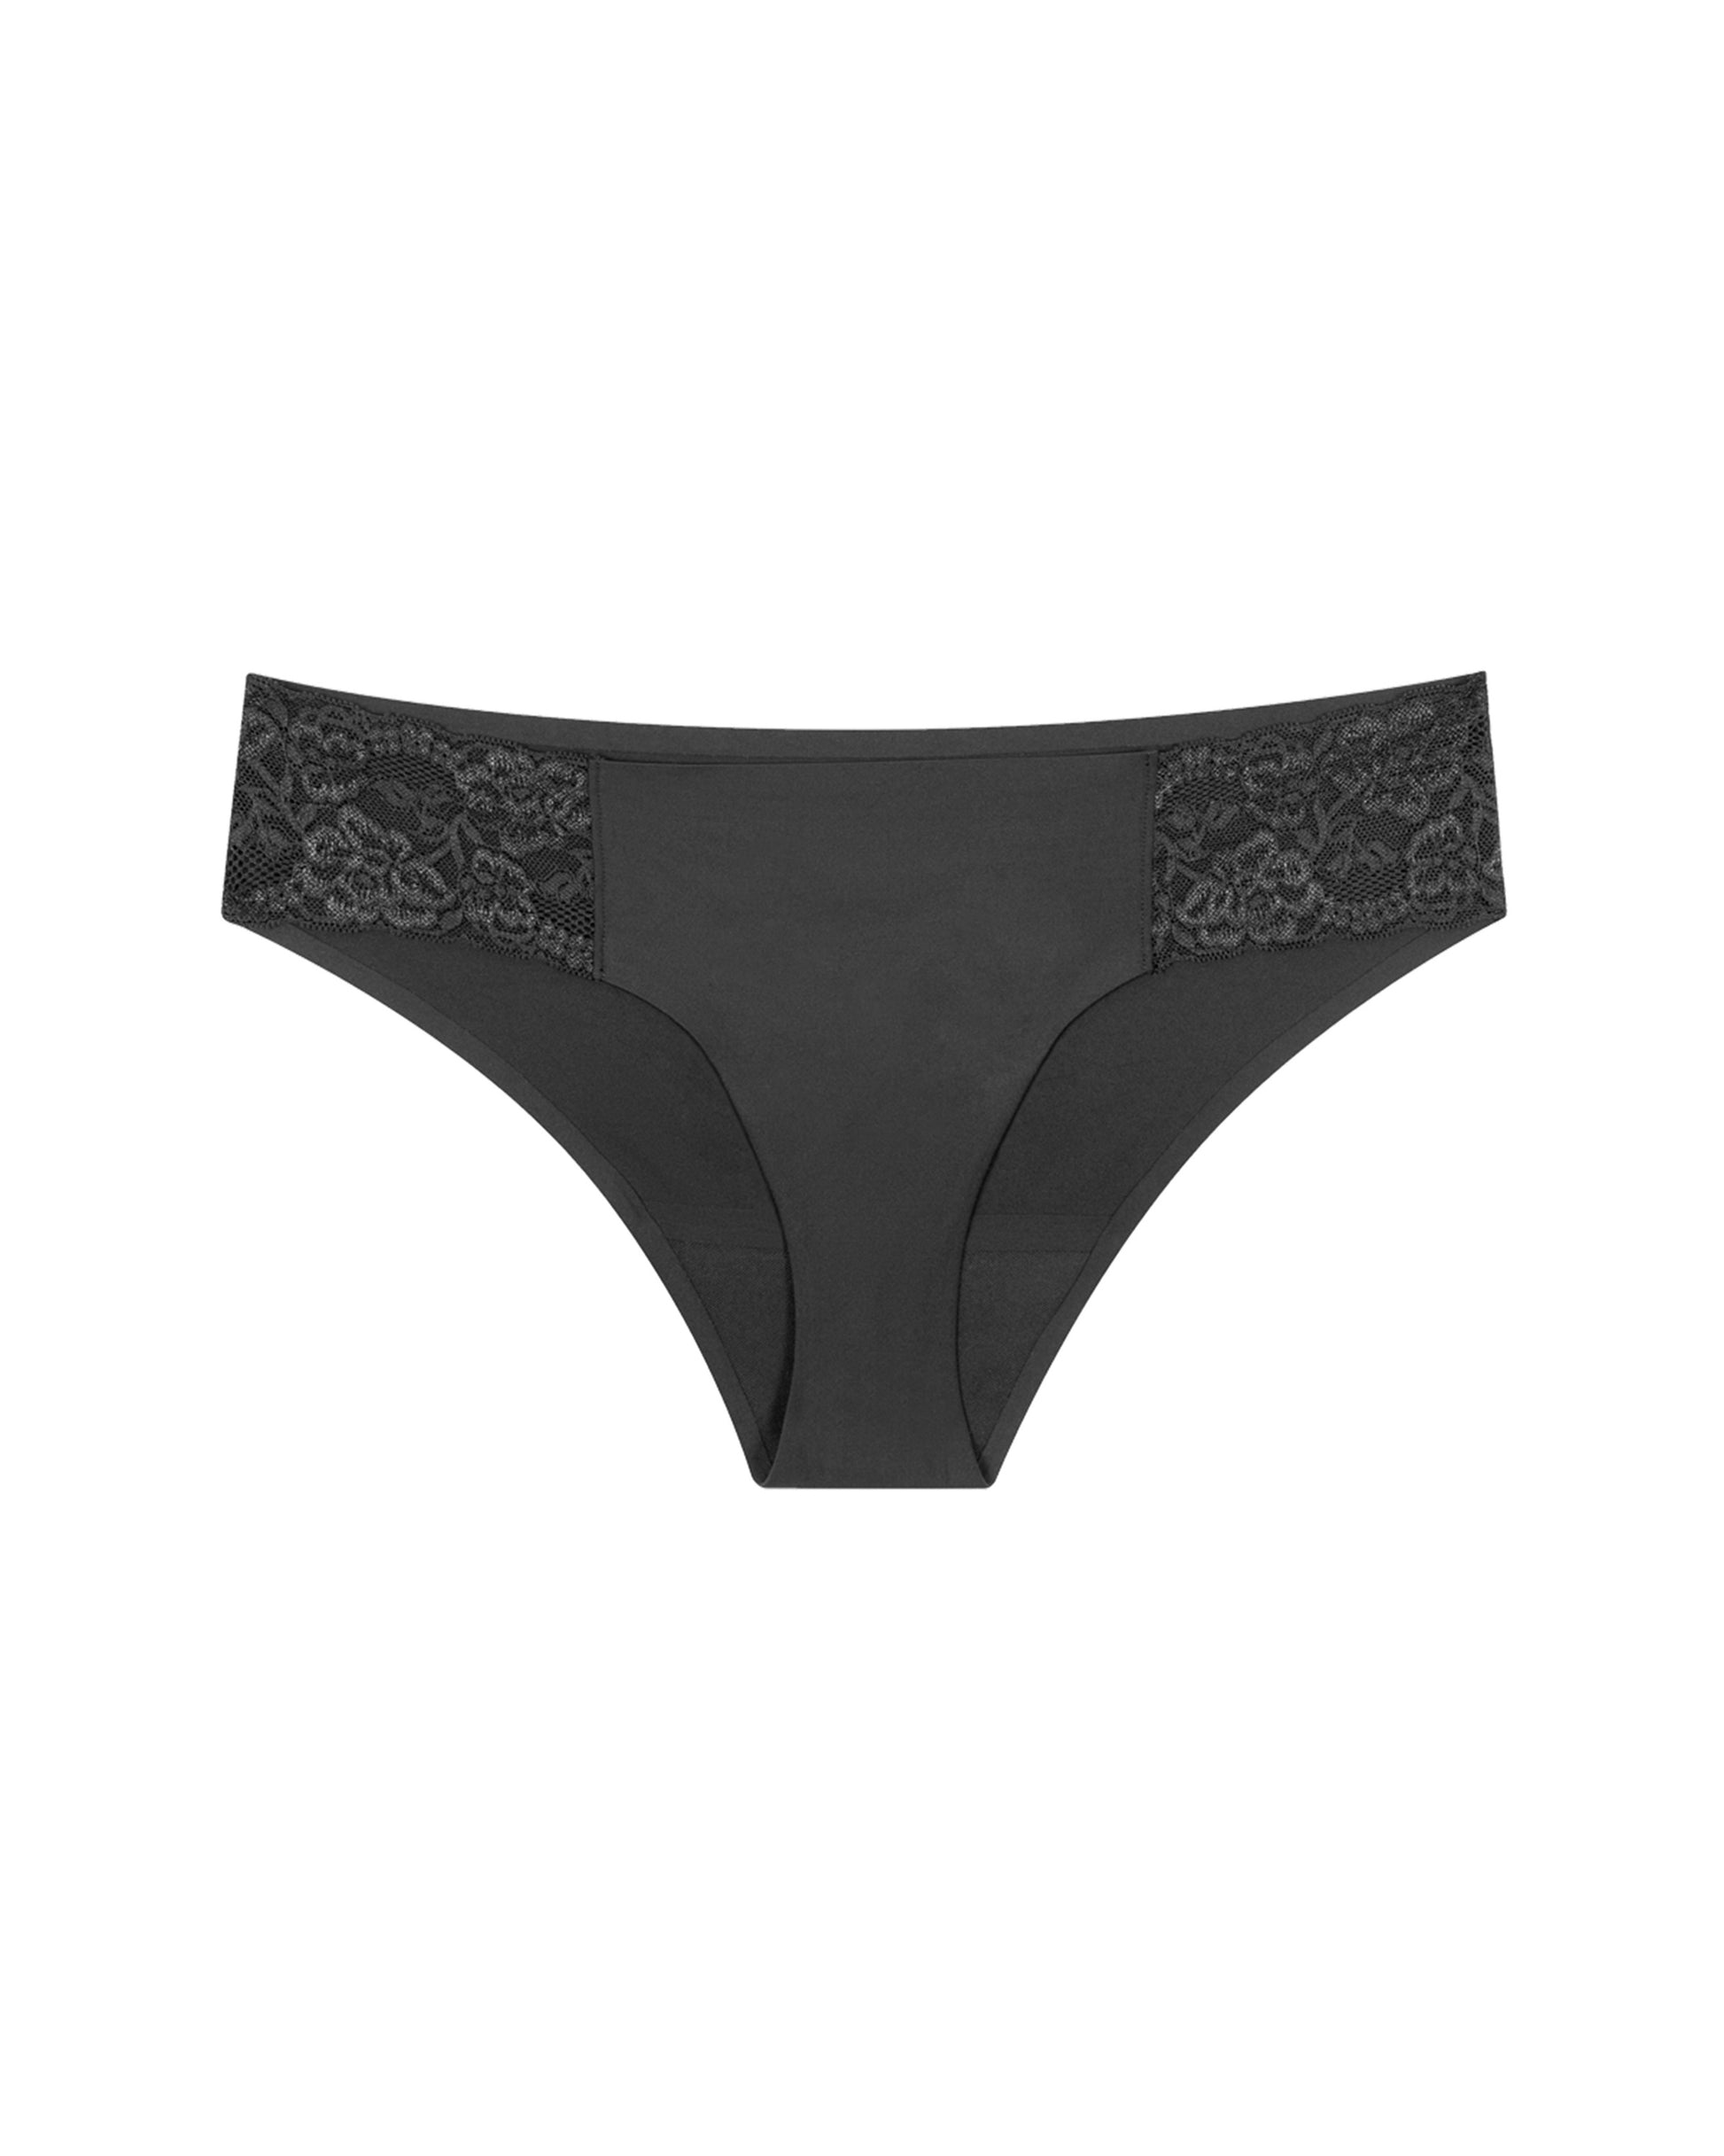 Buy Lace-Trim Cheeky Panty M, Women's Clothing, Montreal Duty Free